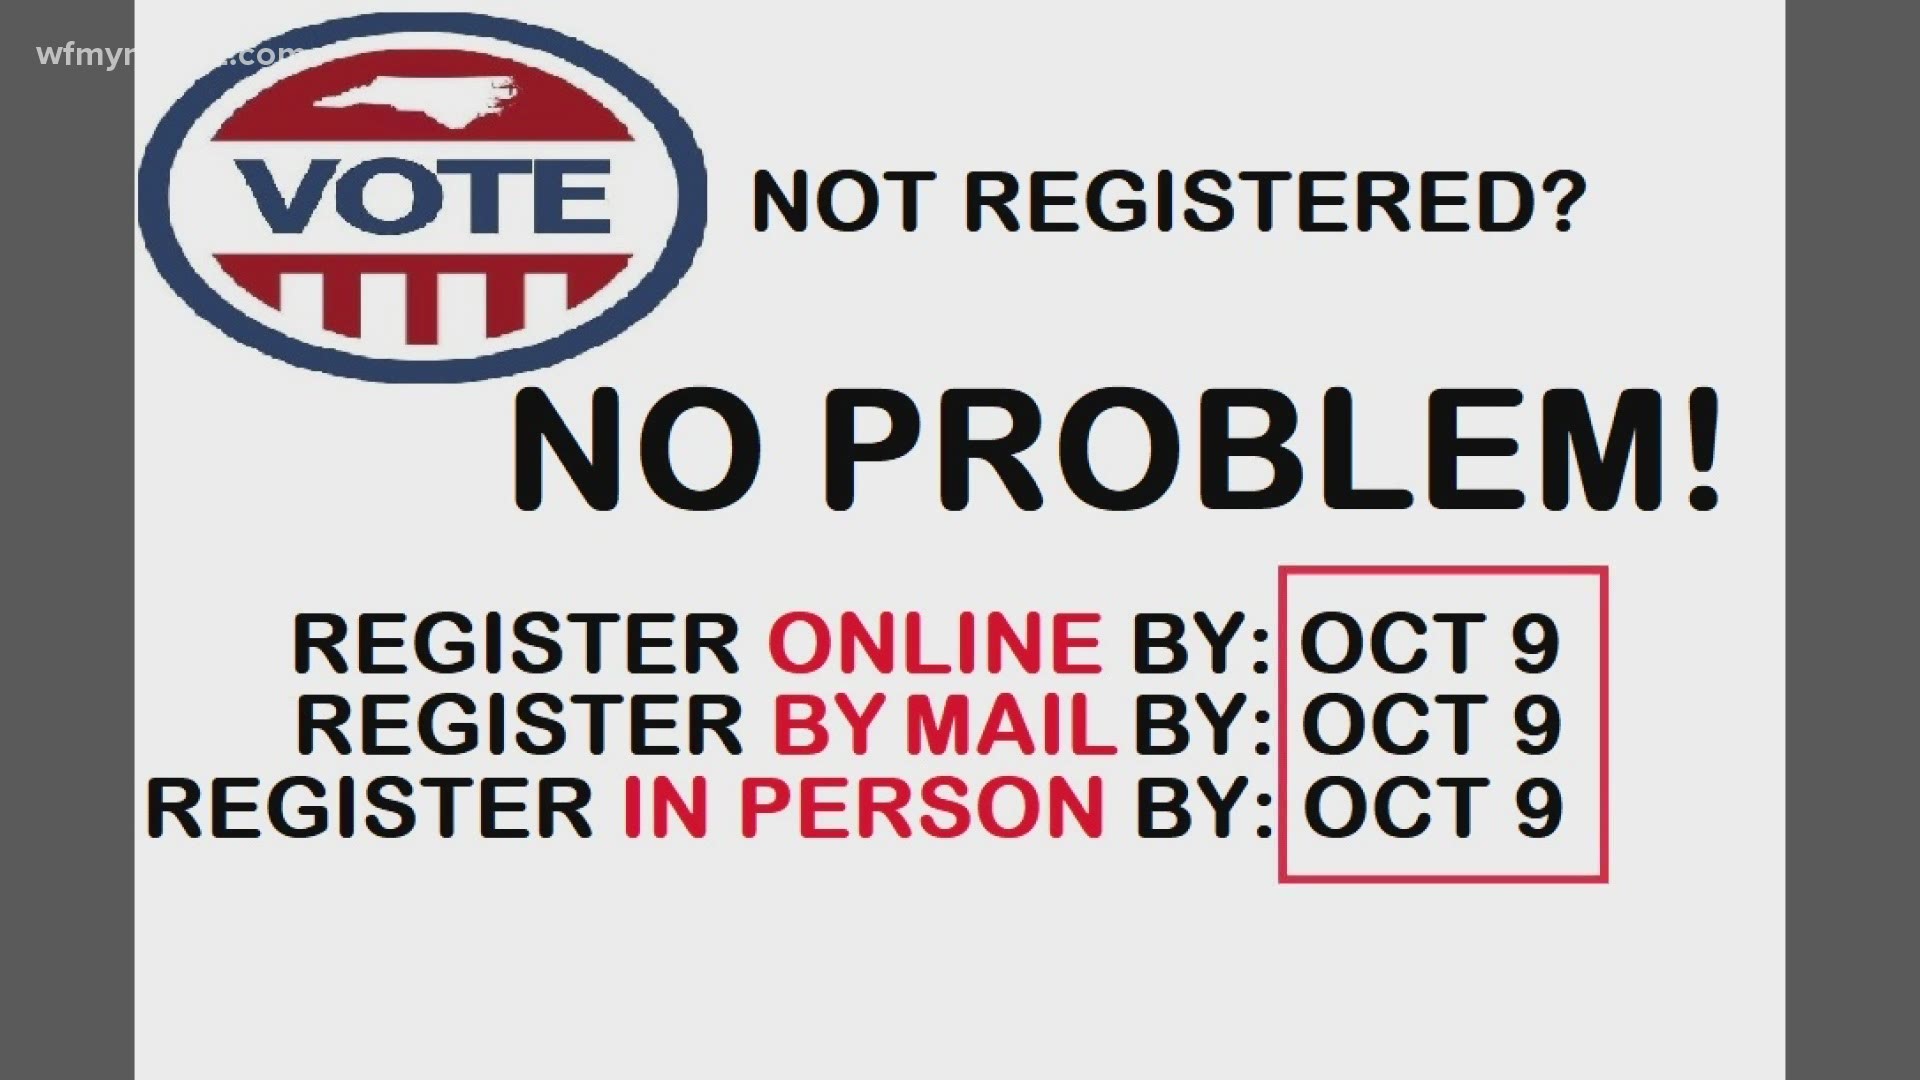 You can't register on election day. You will need to get it done either in-person, online or by mail.